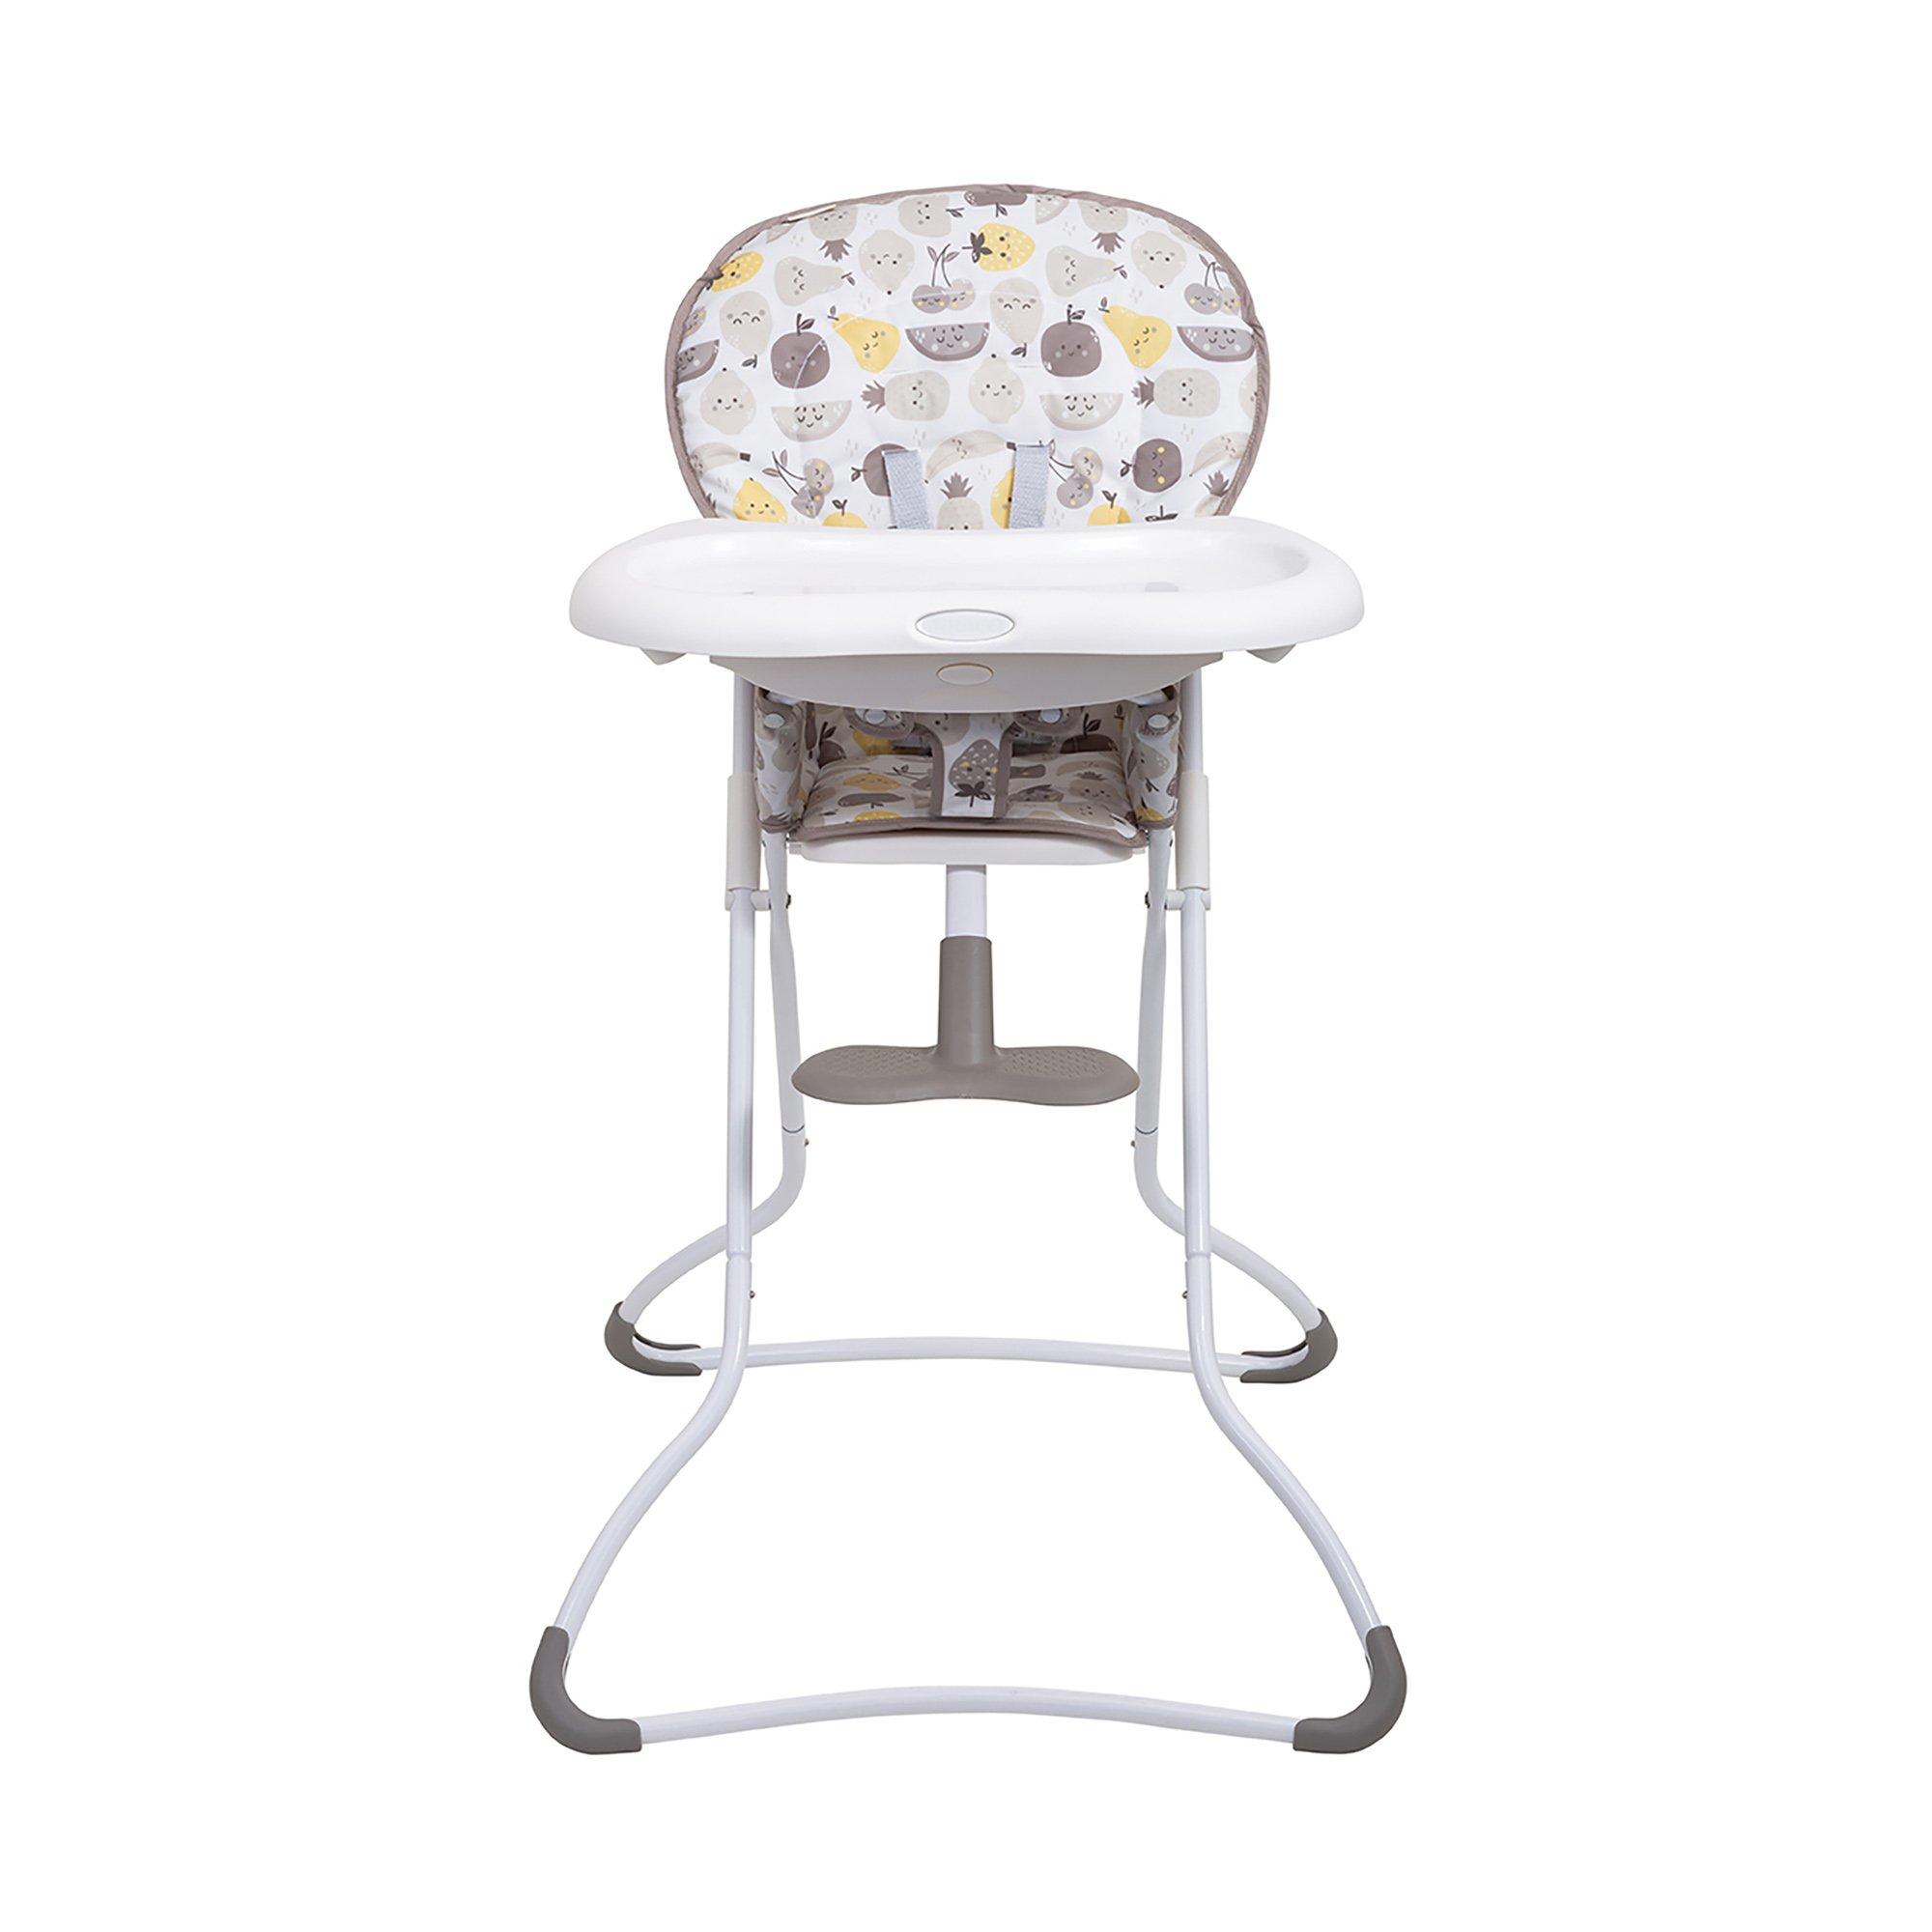 Image of GRACO Hochstuhl SNACK N? STOW - ONE SIZE